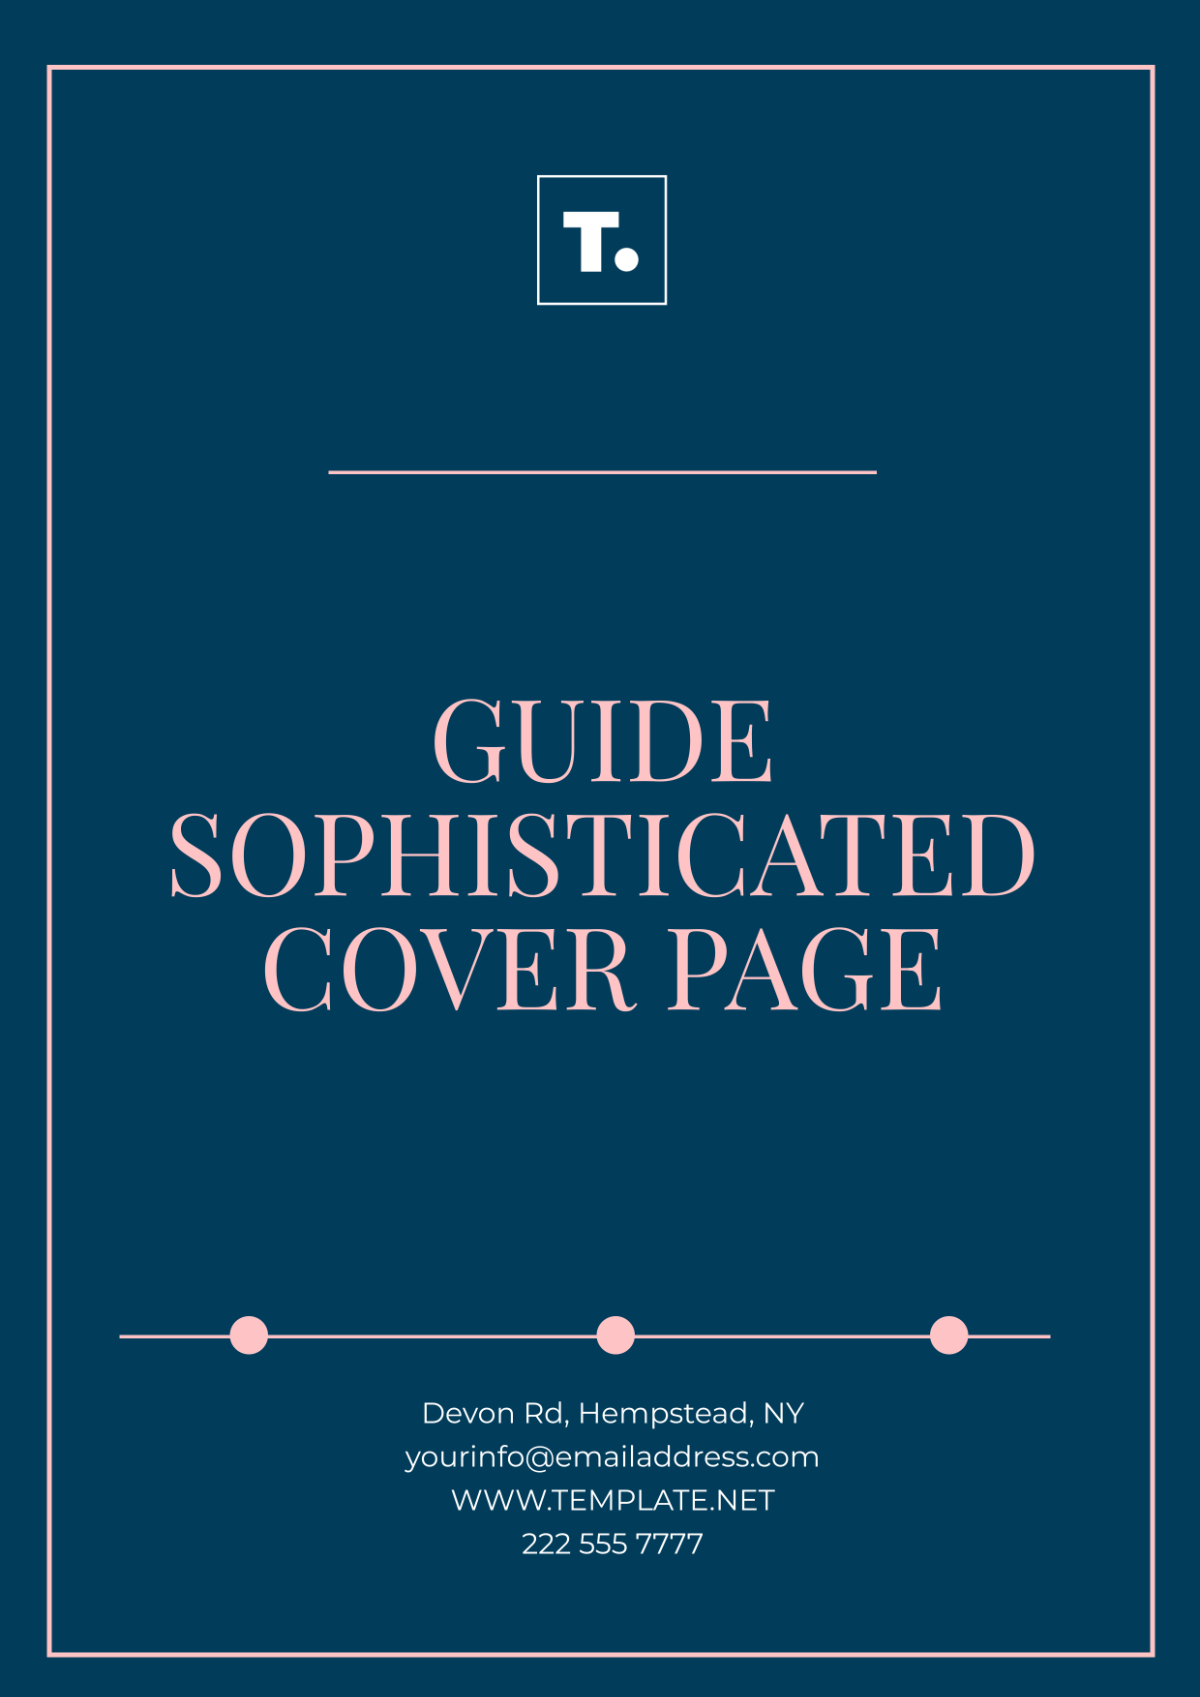 Guide Sophisticated Cover Page